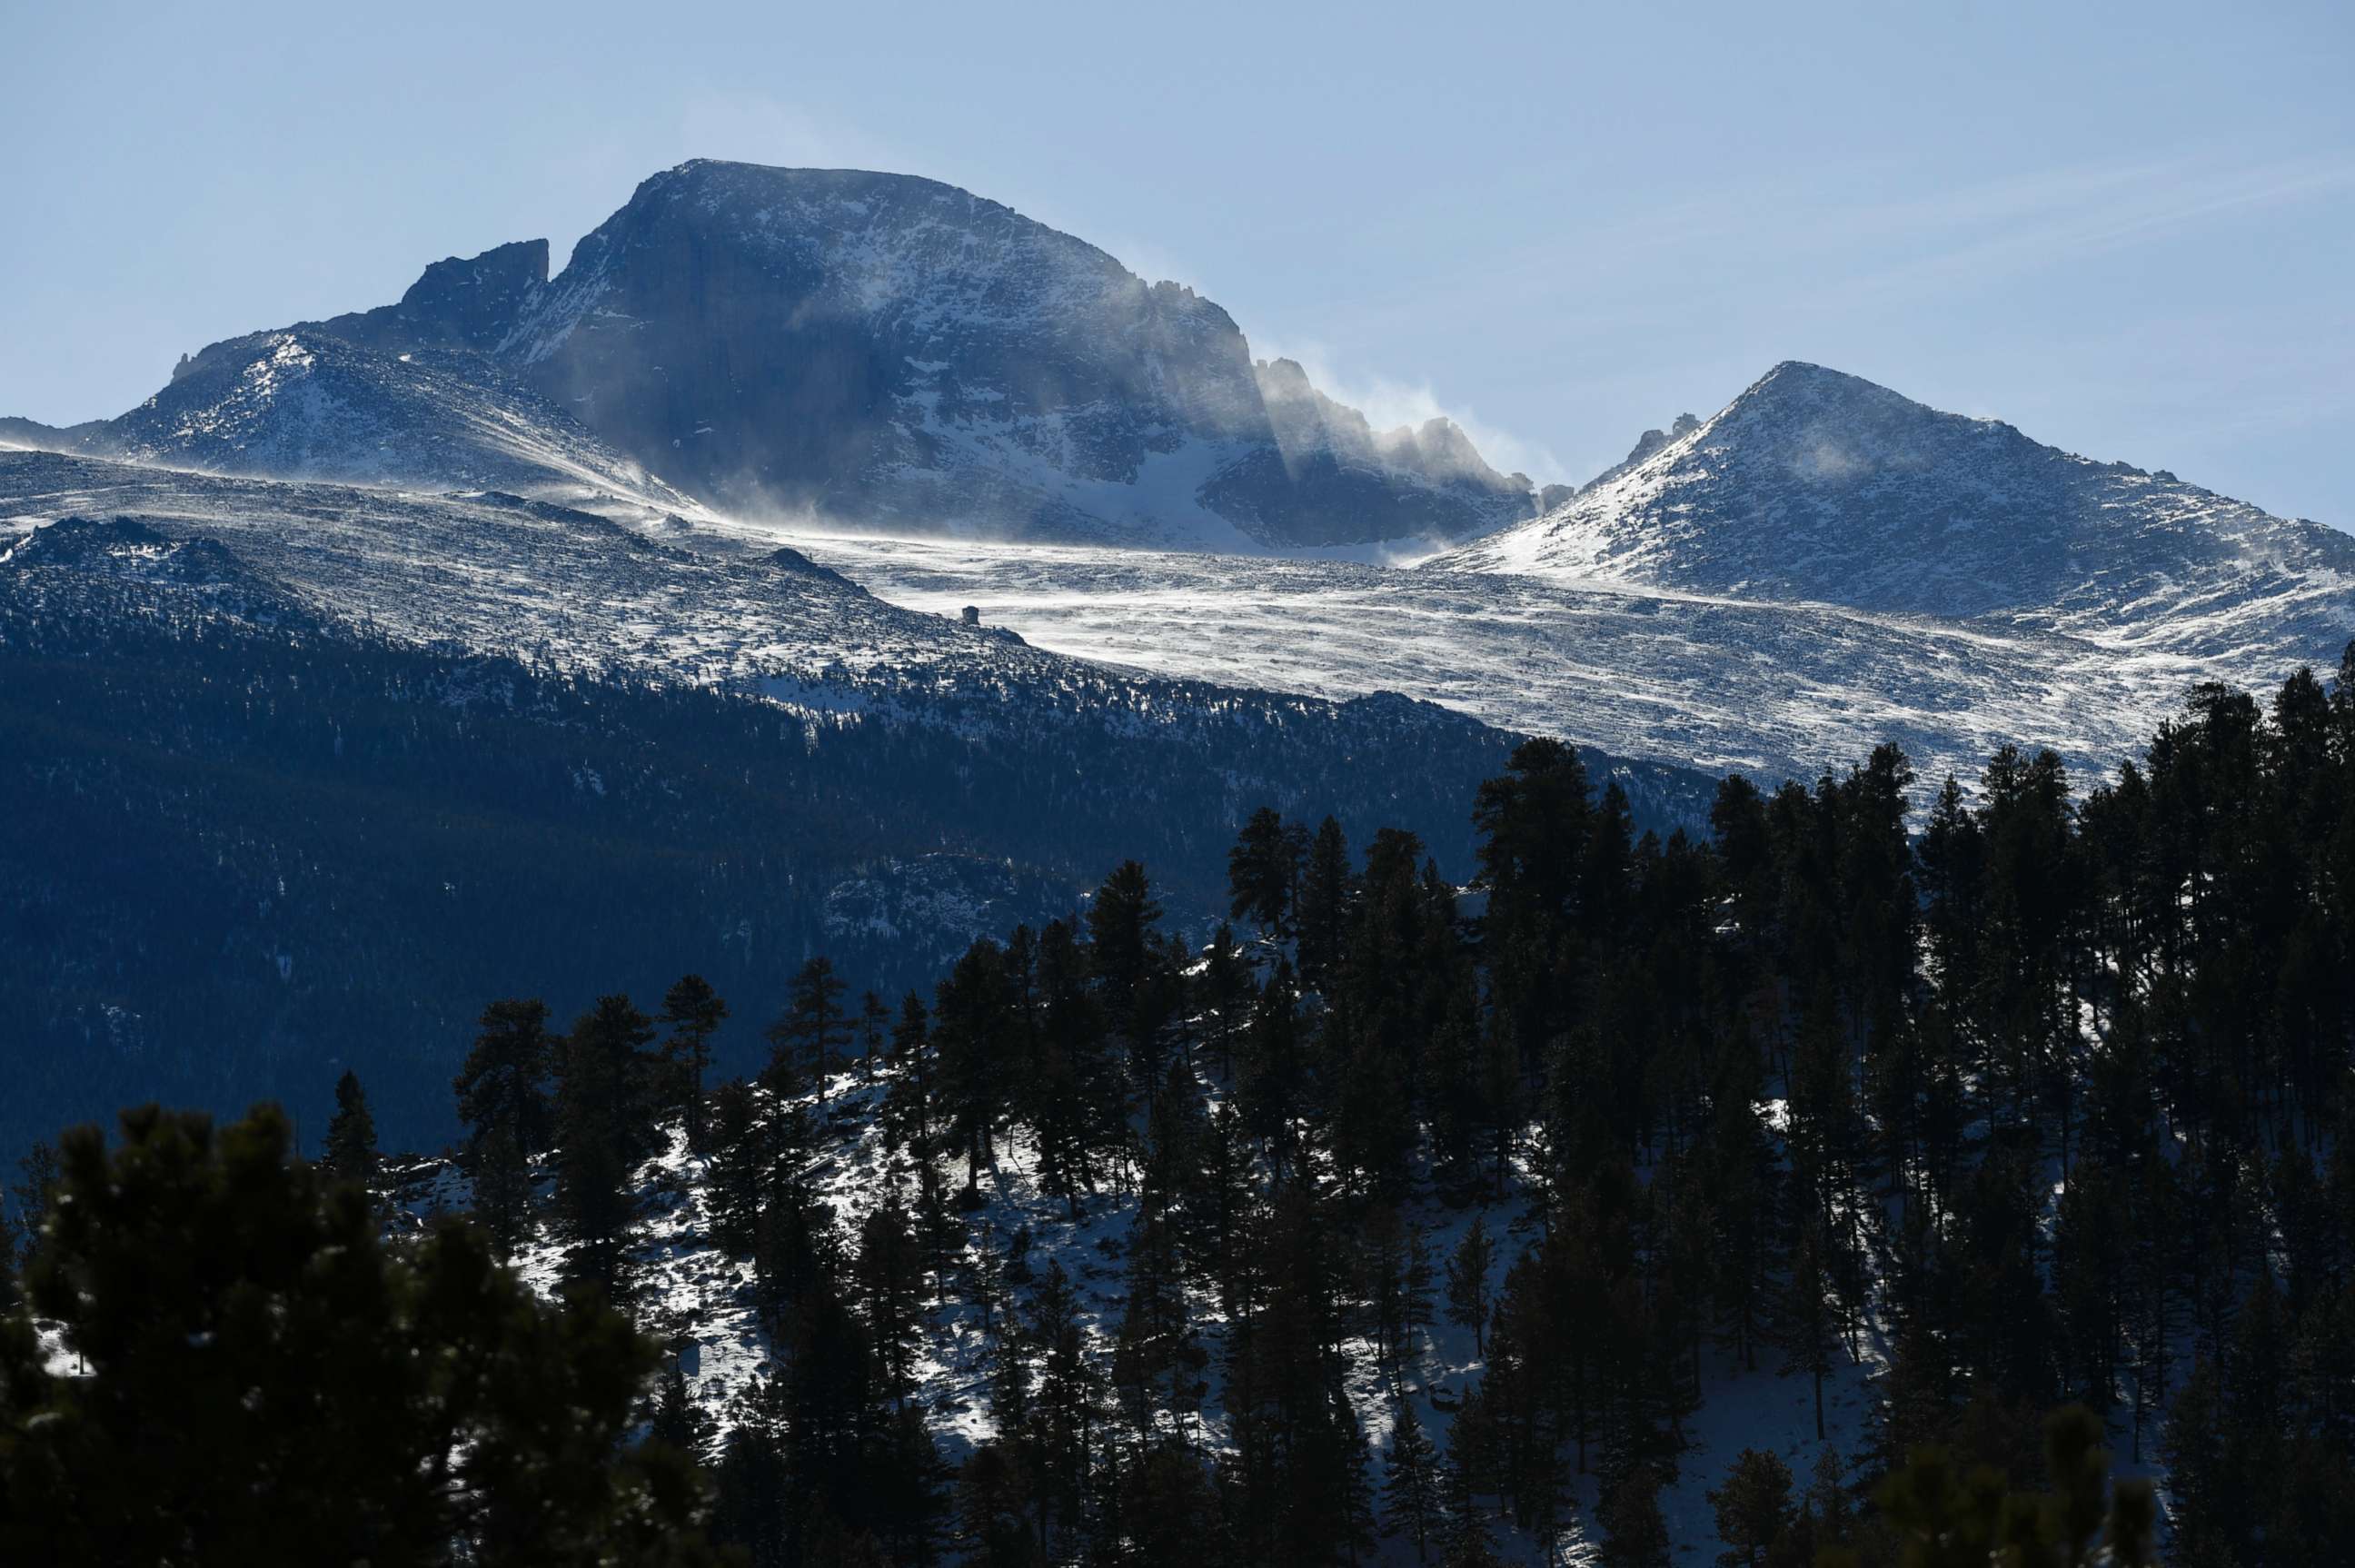 PHOTO: High winds blow snow on Longs Peak in Rocky Mountain National Park on Jan. 22, 2018 in Estes Park, Colo.